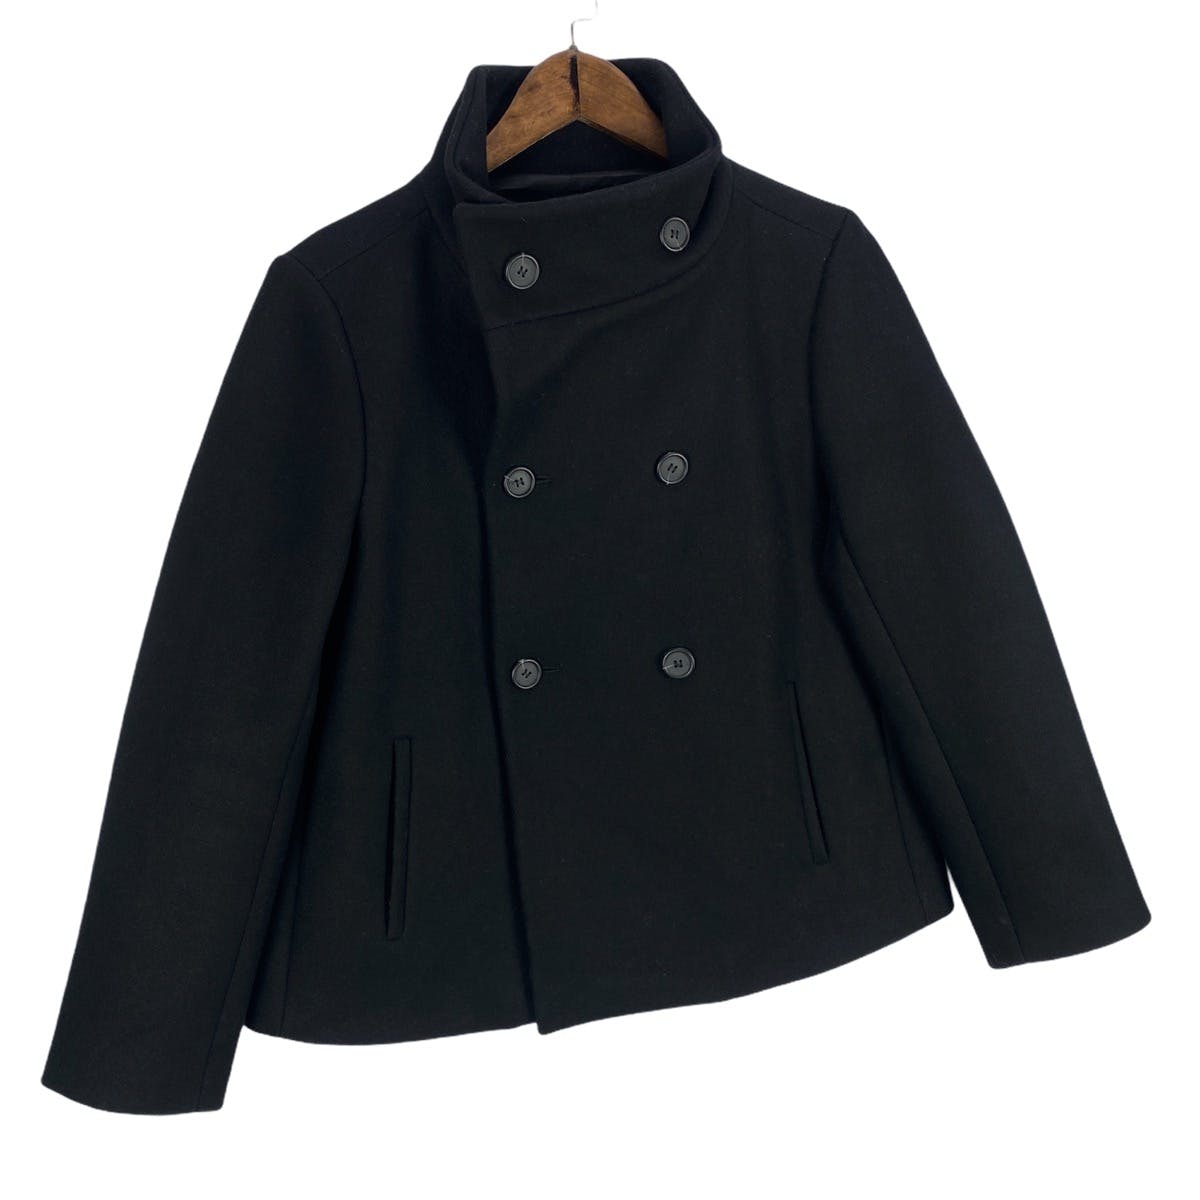 A.P.C Peacoat Wool Cropped Jacket Made In Poland - 7